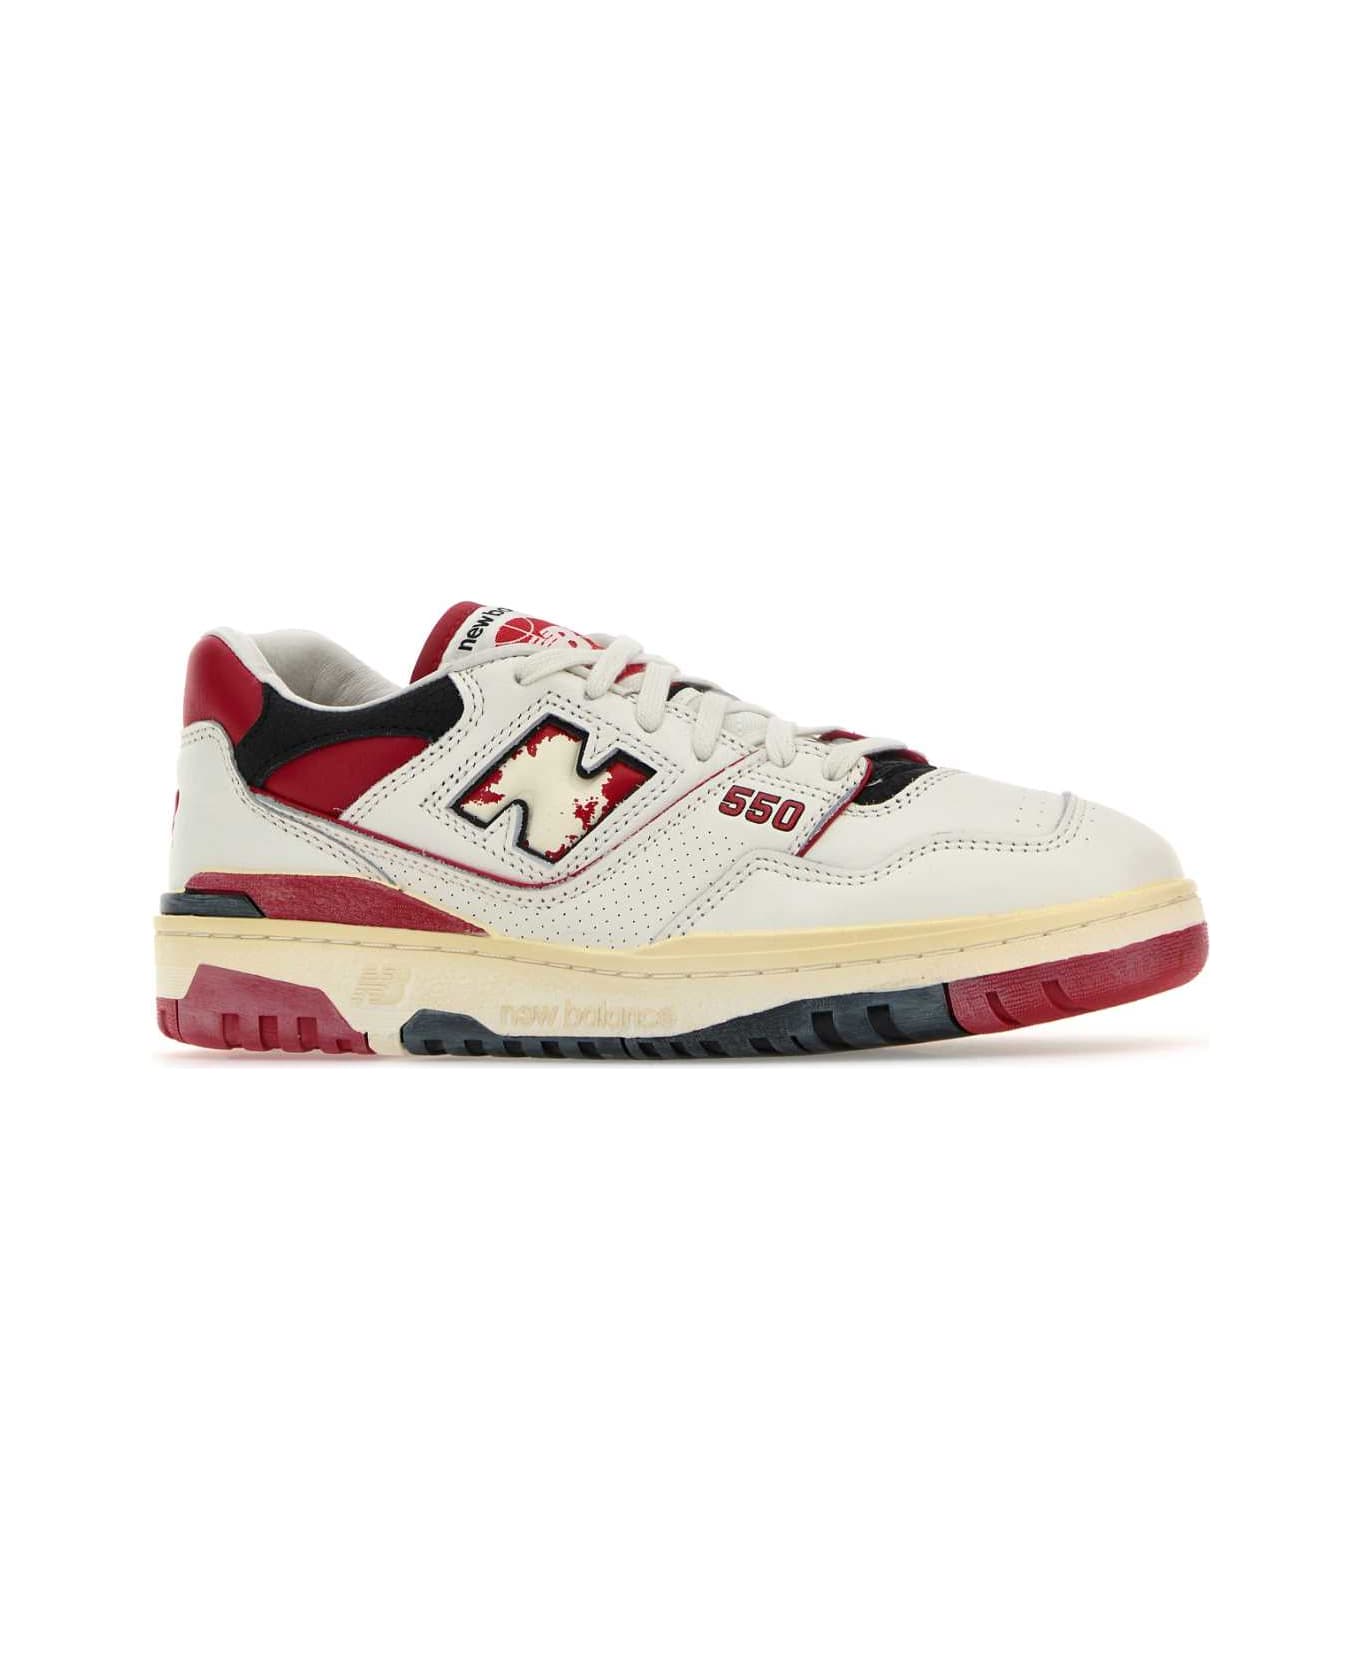 New Balance Multicolor Leather 550 Sneakers - OFFWHITERED